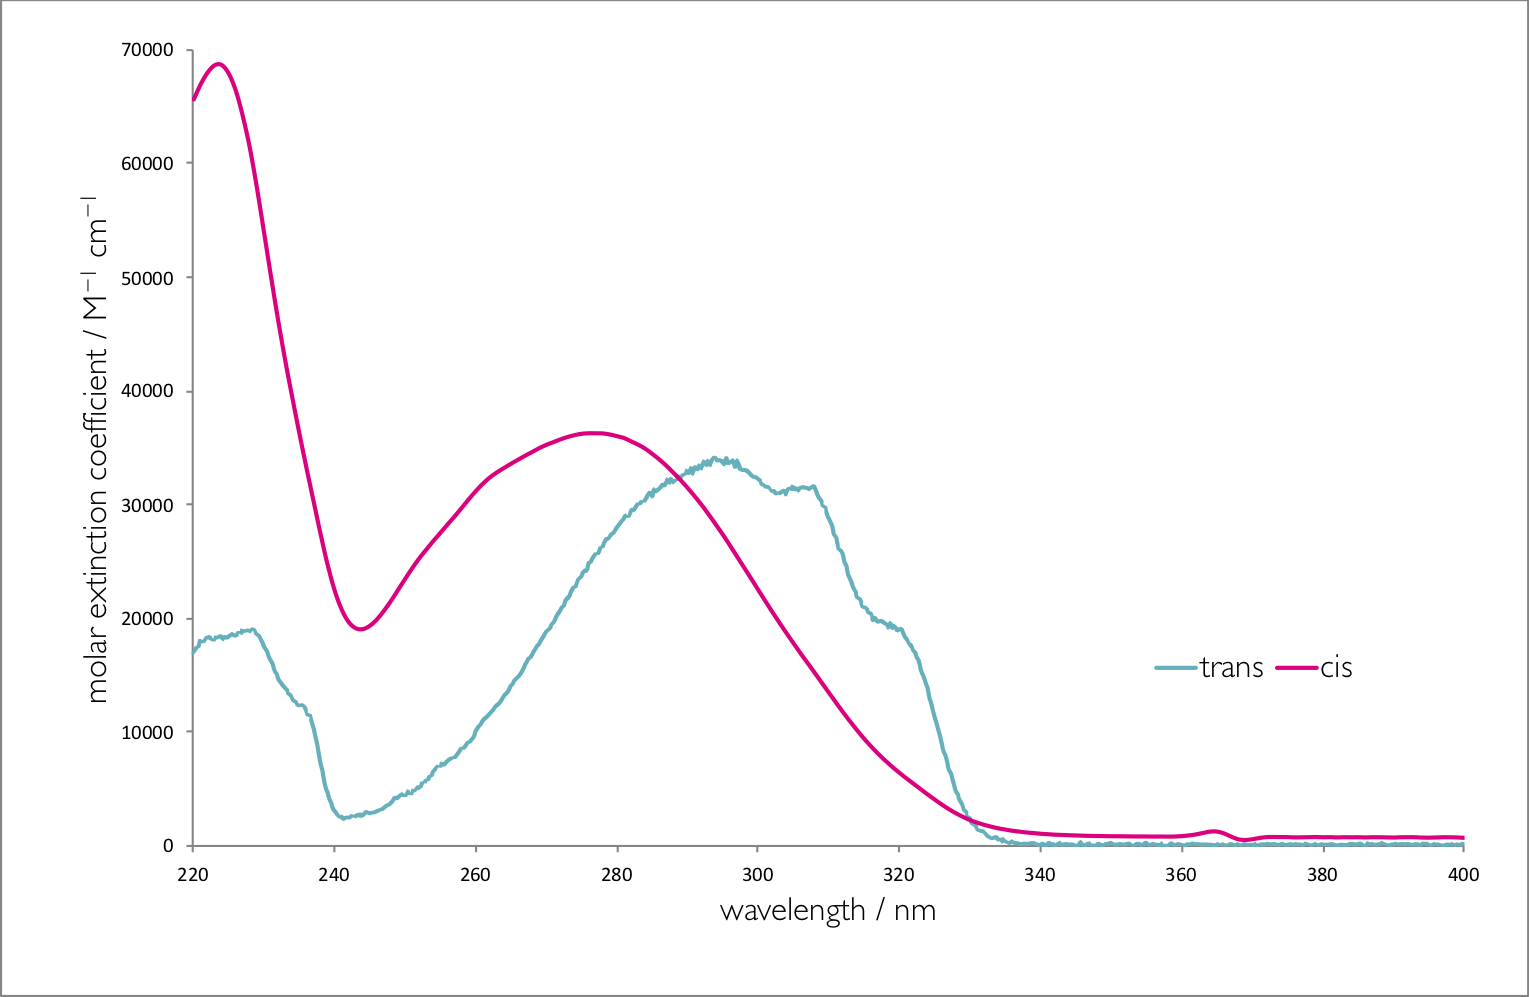 The absorption spectra of trans and cis stilbene in hexane.